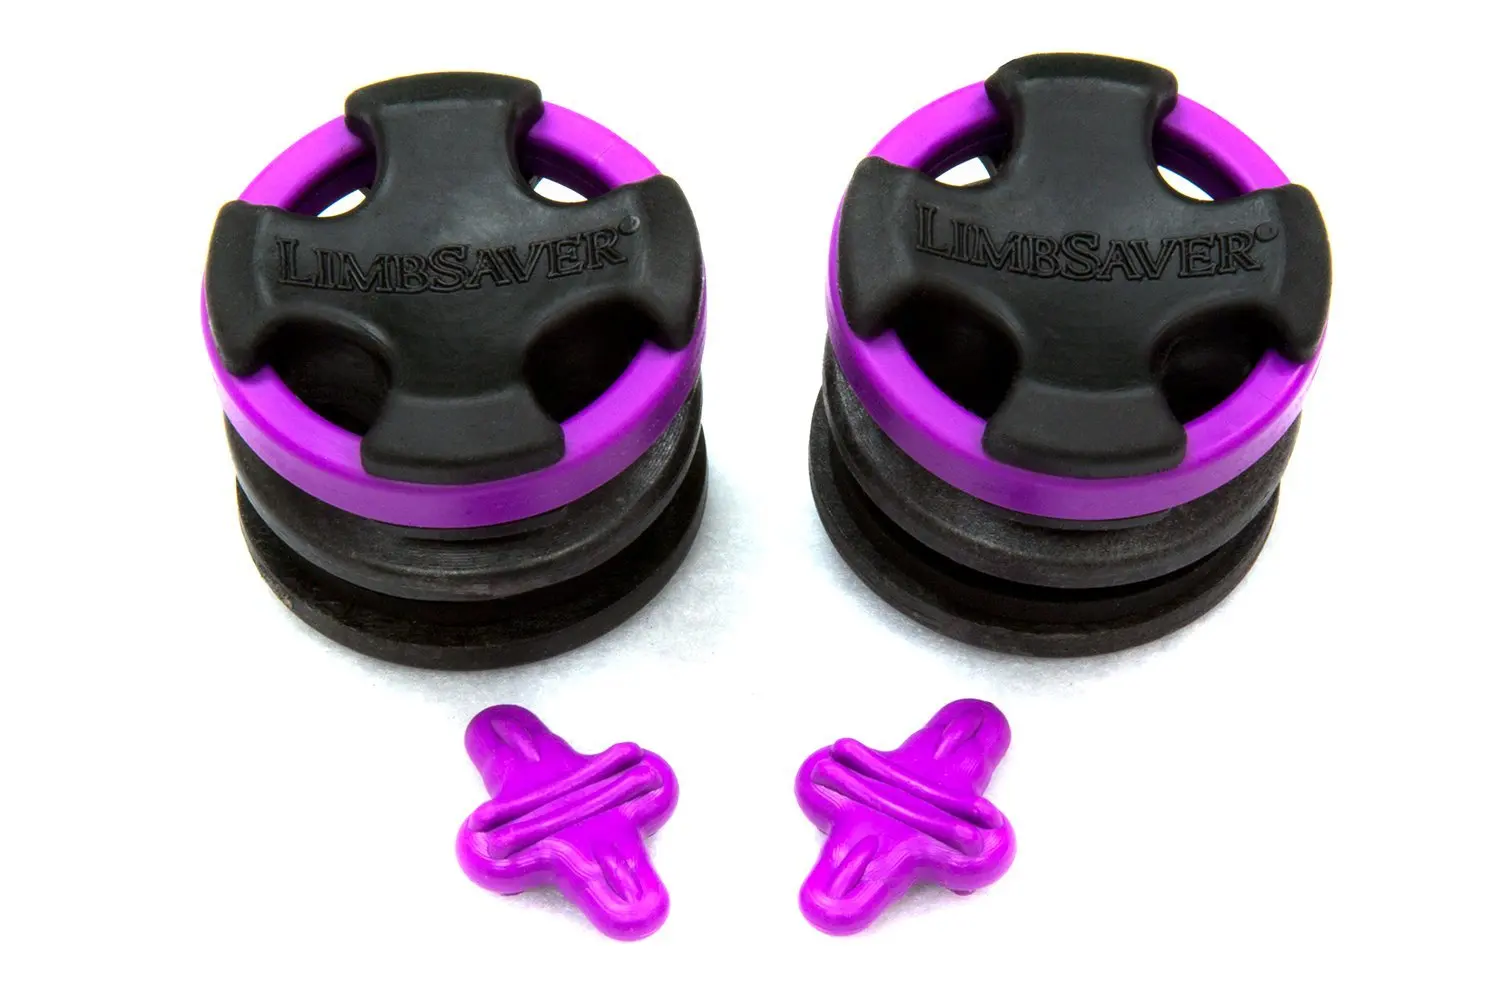 MonkeyJack 2 Pieces Rubber Limb Vibration Dampener for Compound Bow